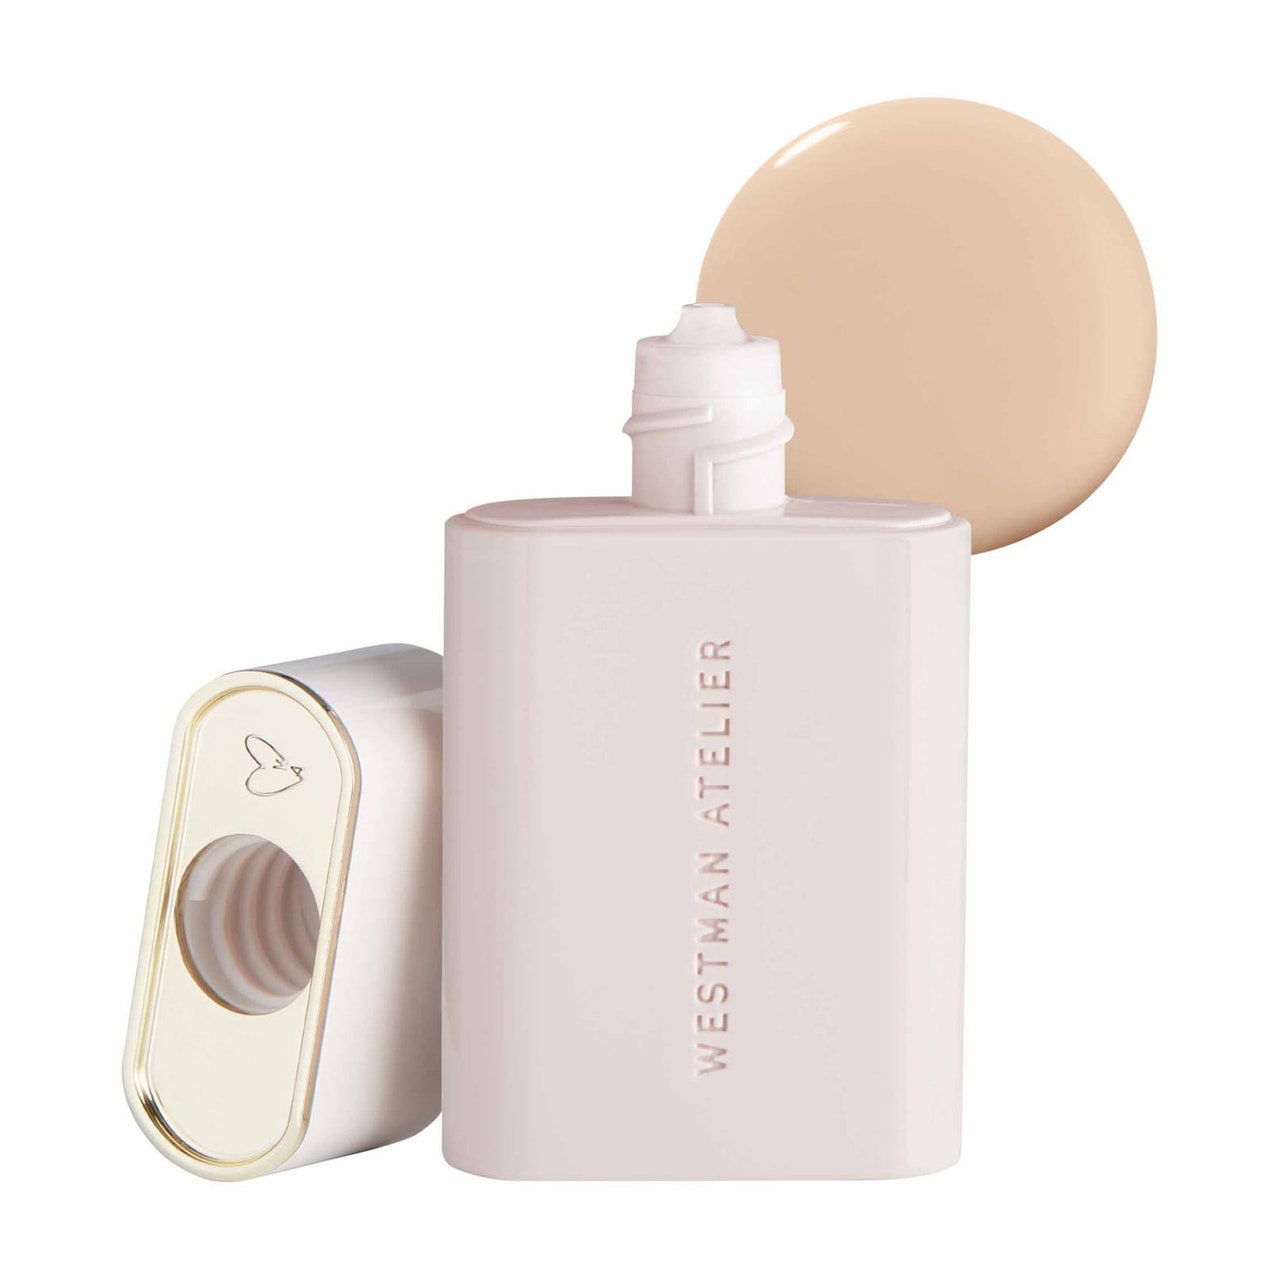 Westman Atelier Vital Skincare Dewy Foundation Drops pale pink squeeze bottle of foundation drops with cap to the side on white background